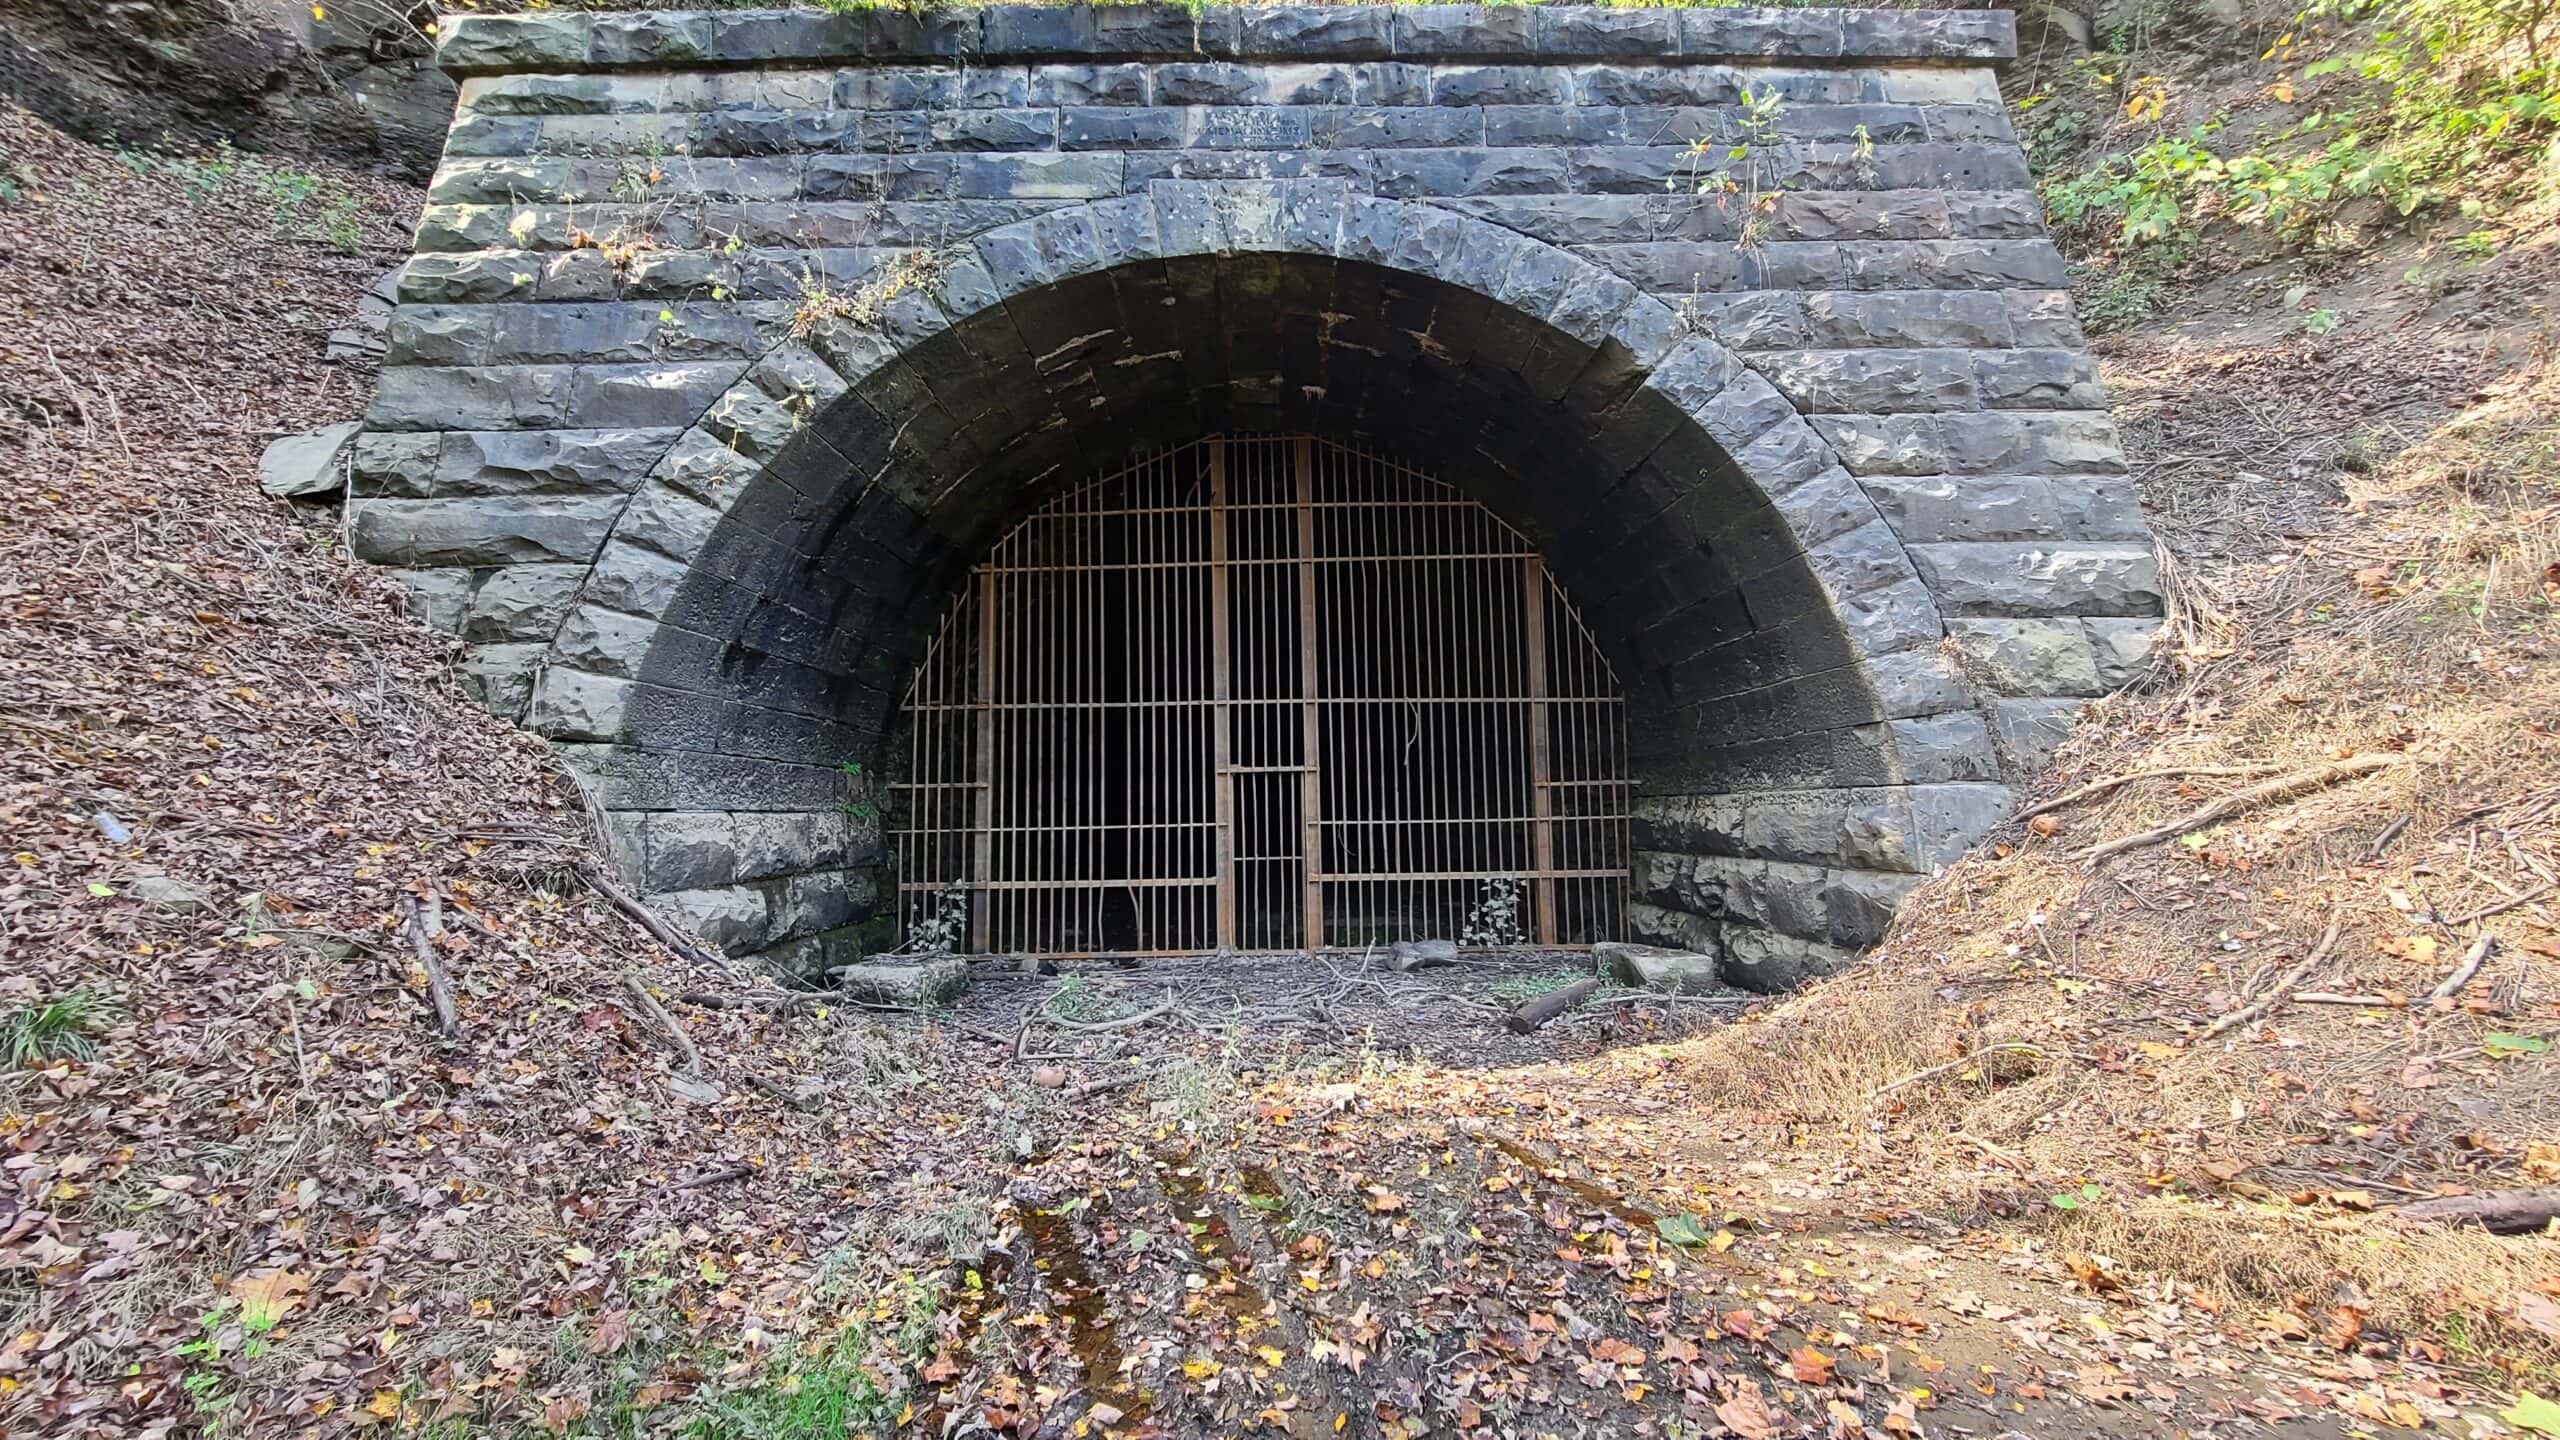 The eastern portal of the 1907 railroad tunnel. Logs and other debris are present near the gate.